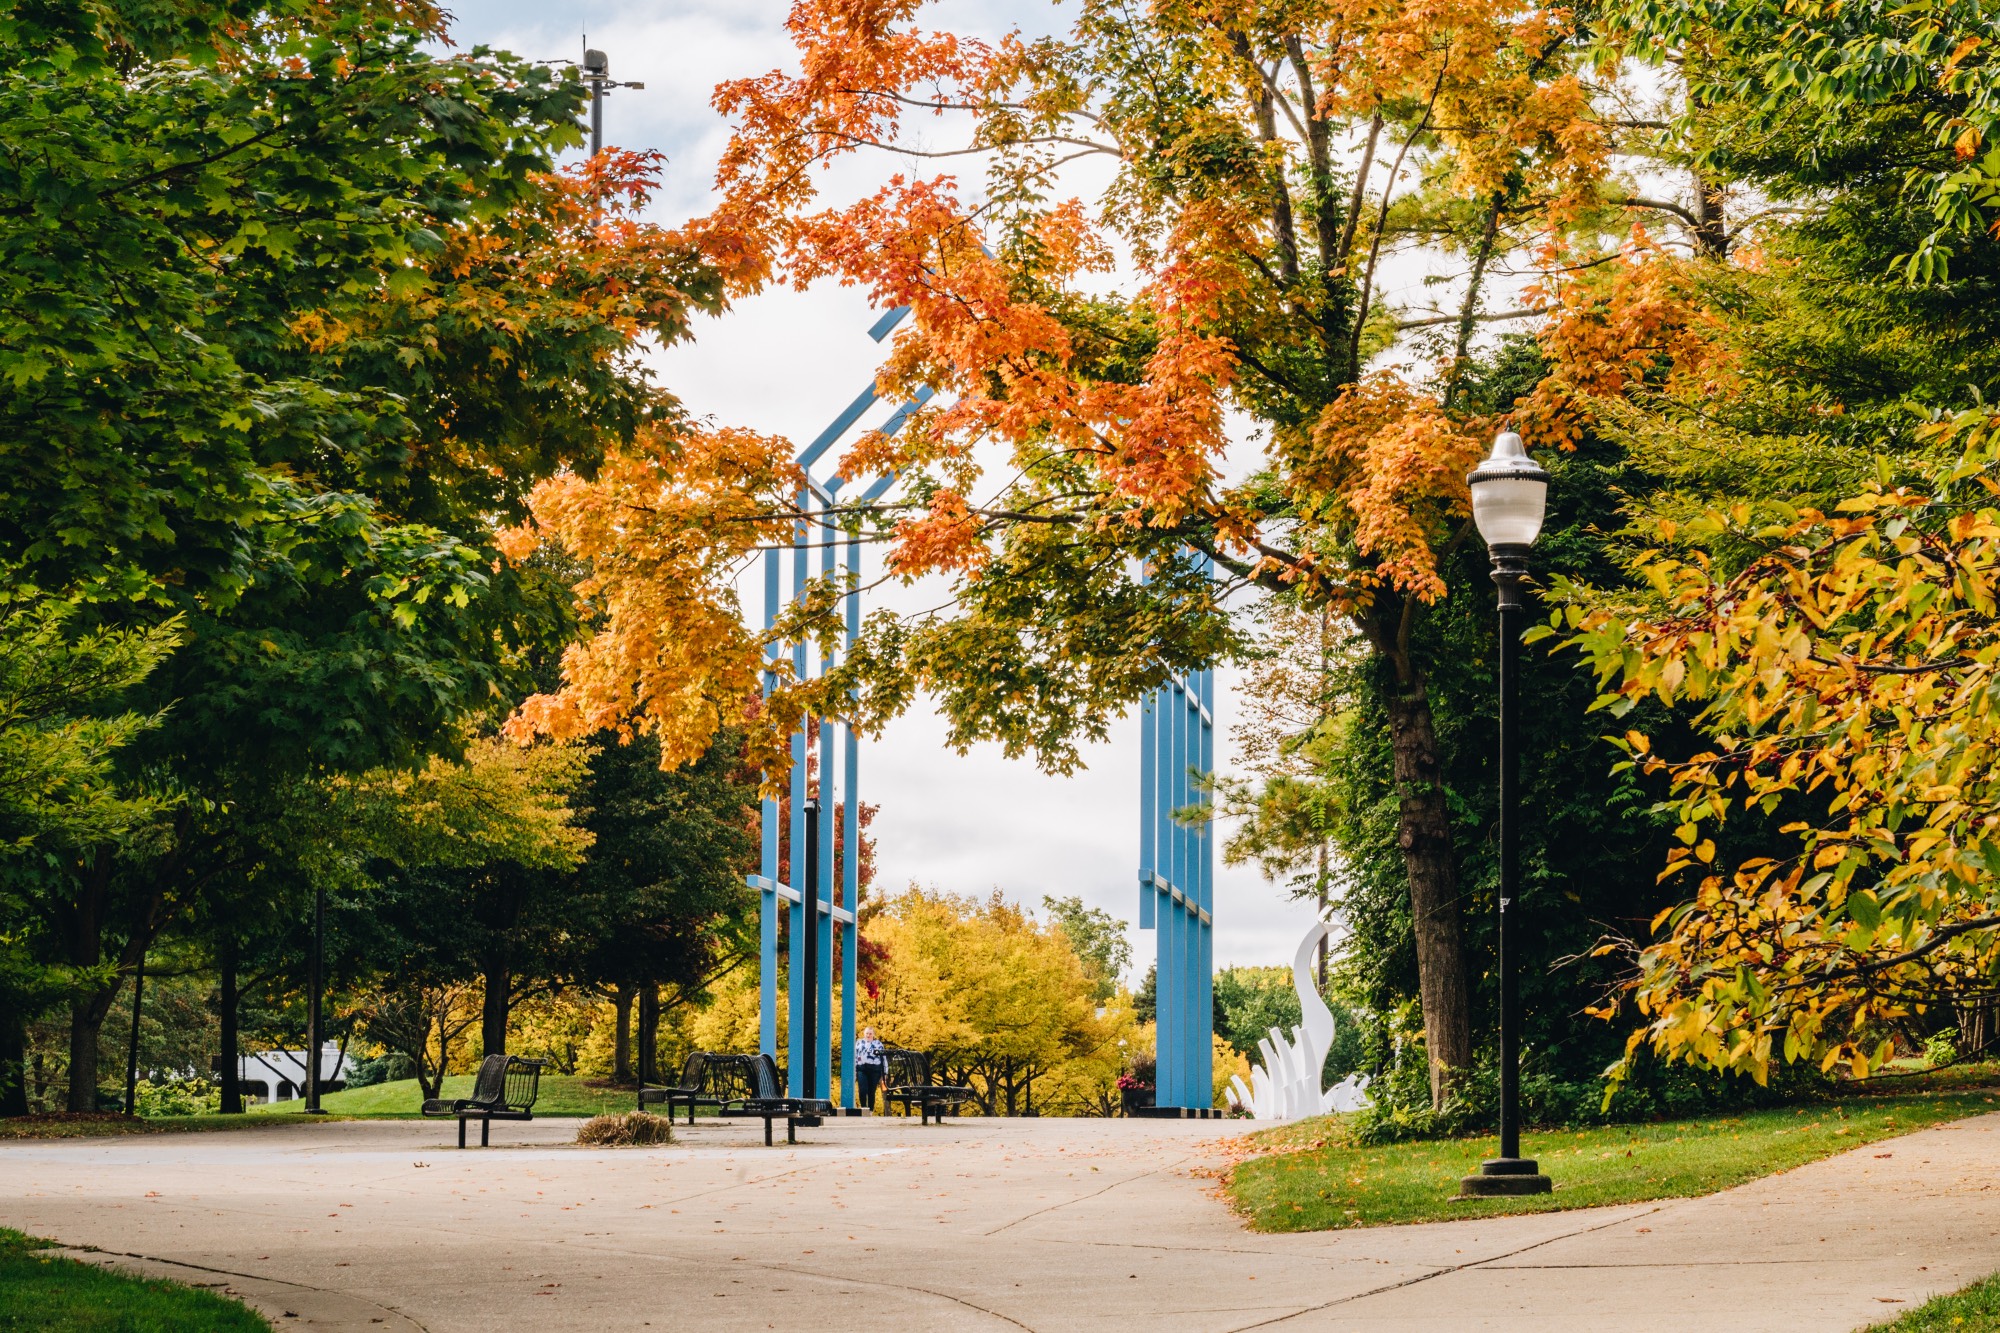 GVSU Allendale campus with fall colors